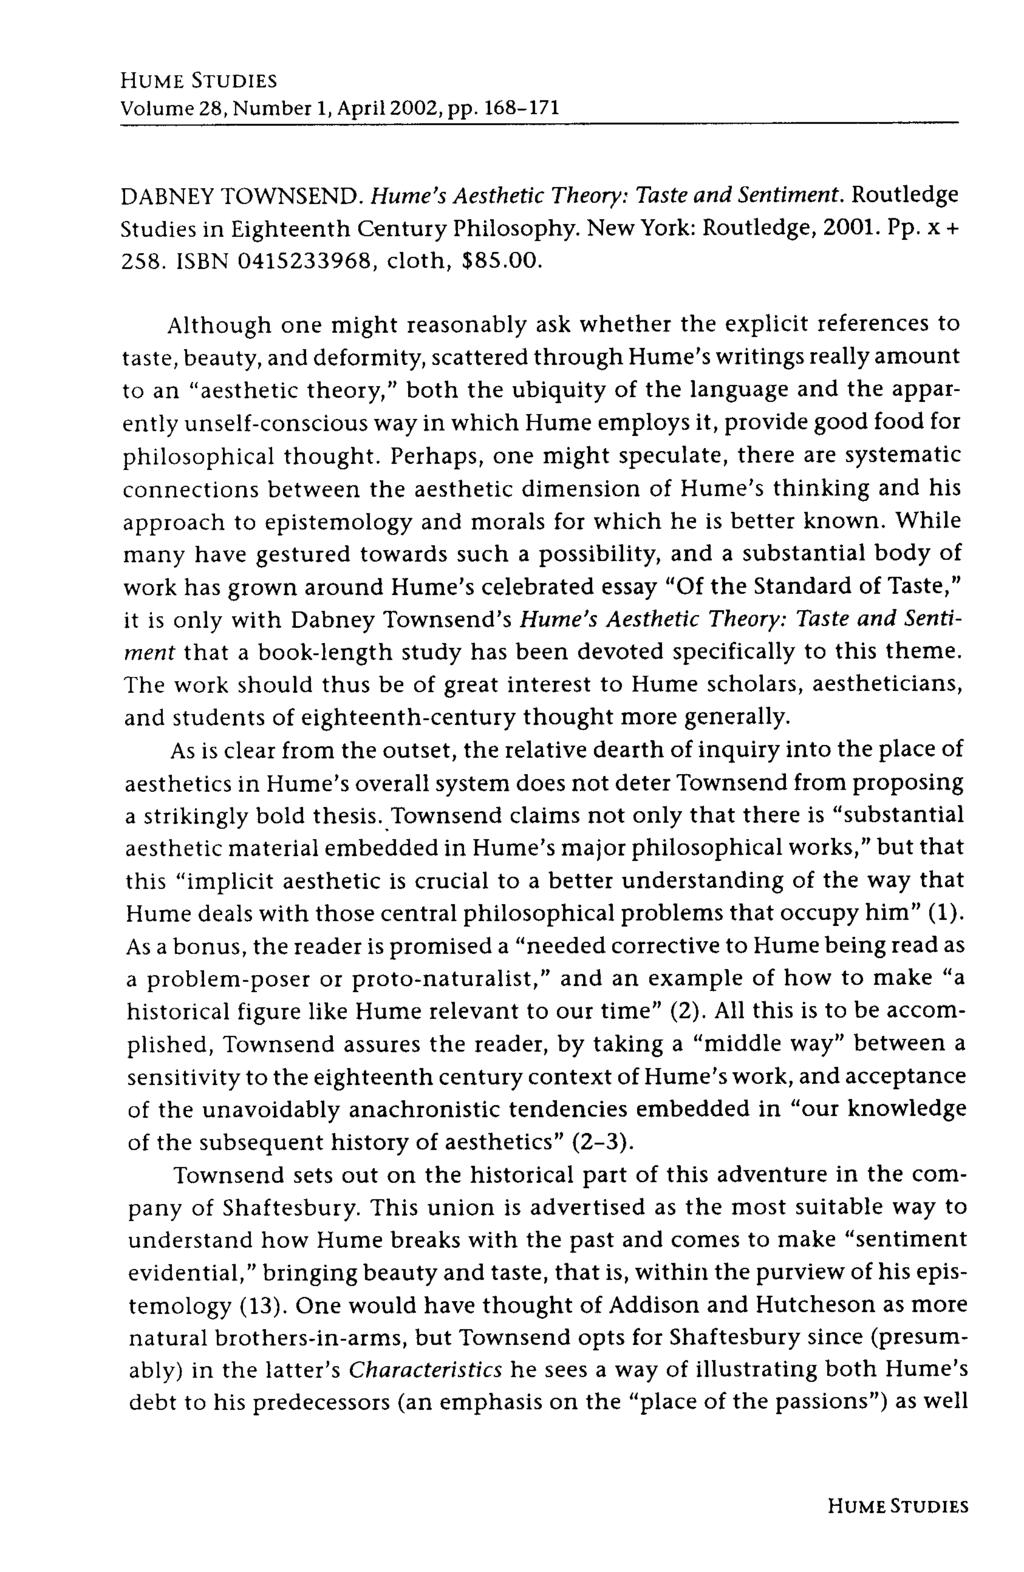 HUME STUDIES Volume 28, Number 1, April 2002, pp. 168-171 DABNEY TOWNSEND. Hume s Aesthetic Theory: Taste and Sentiment. Routledge Studies in Eighteenth Century Philosophy. New York: Routledge, 2001.